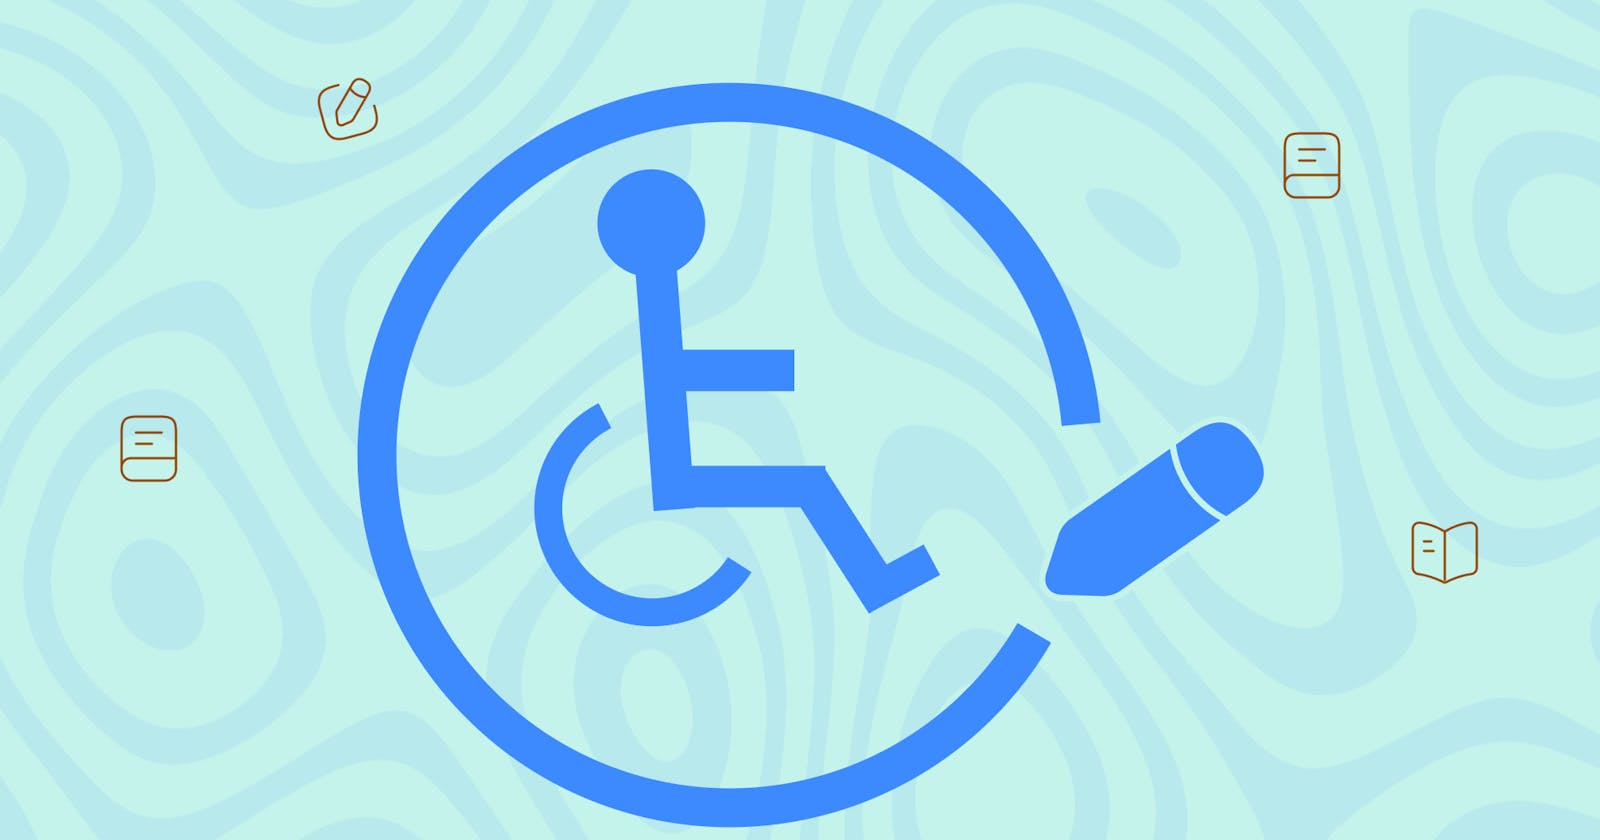 Accessibility in Content Writing.